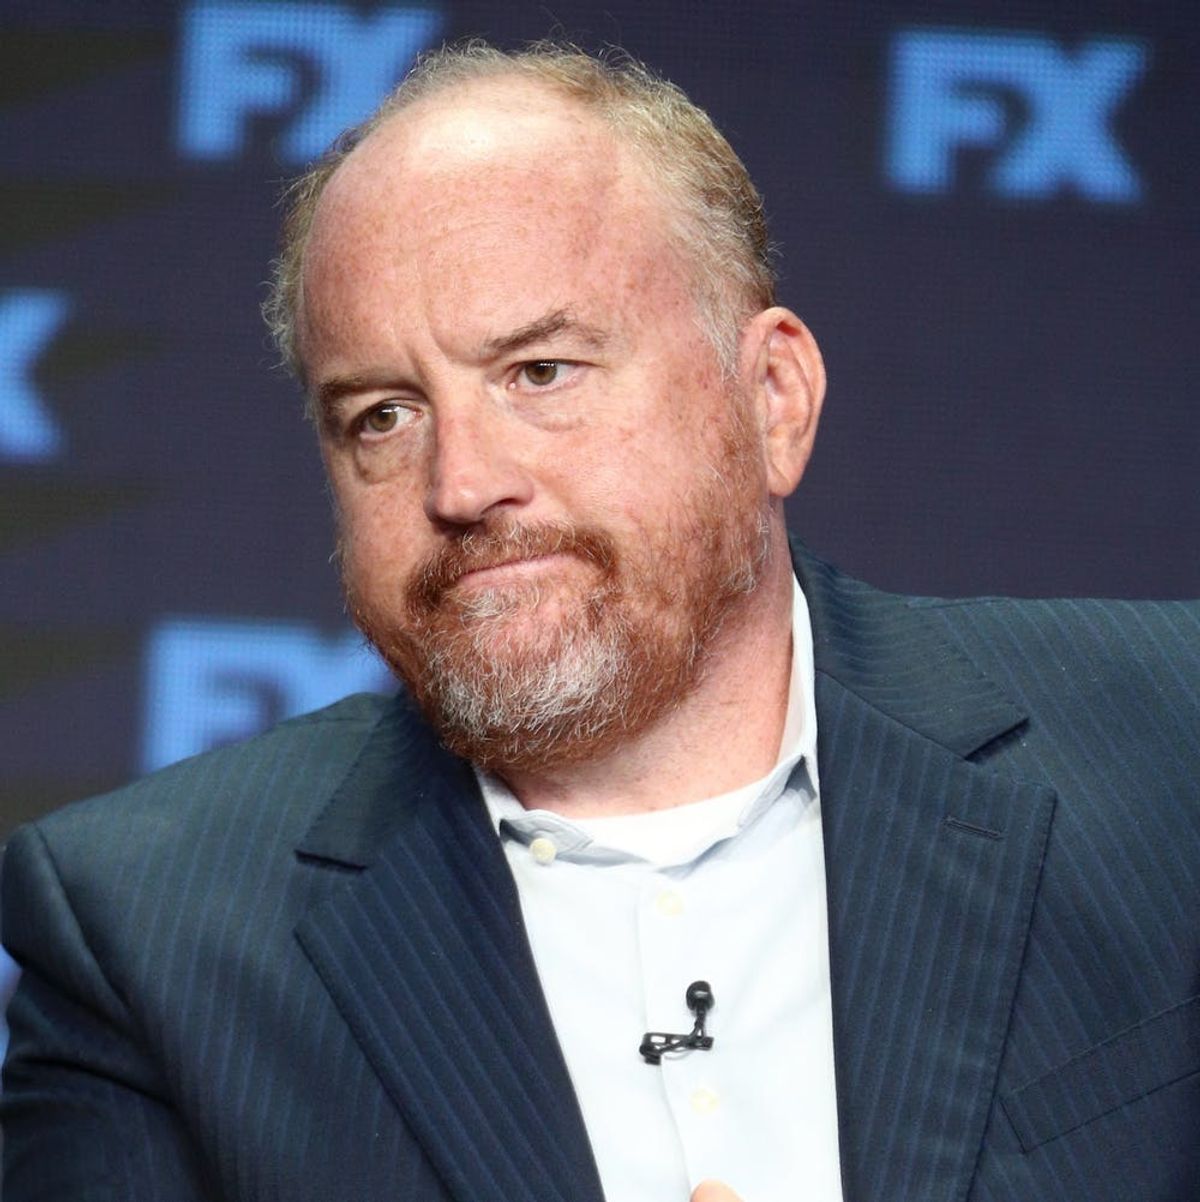 Louis C.K. Film Release, and More, Cancelled in the Wake of New Allegations